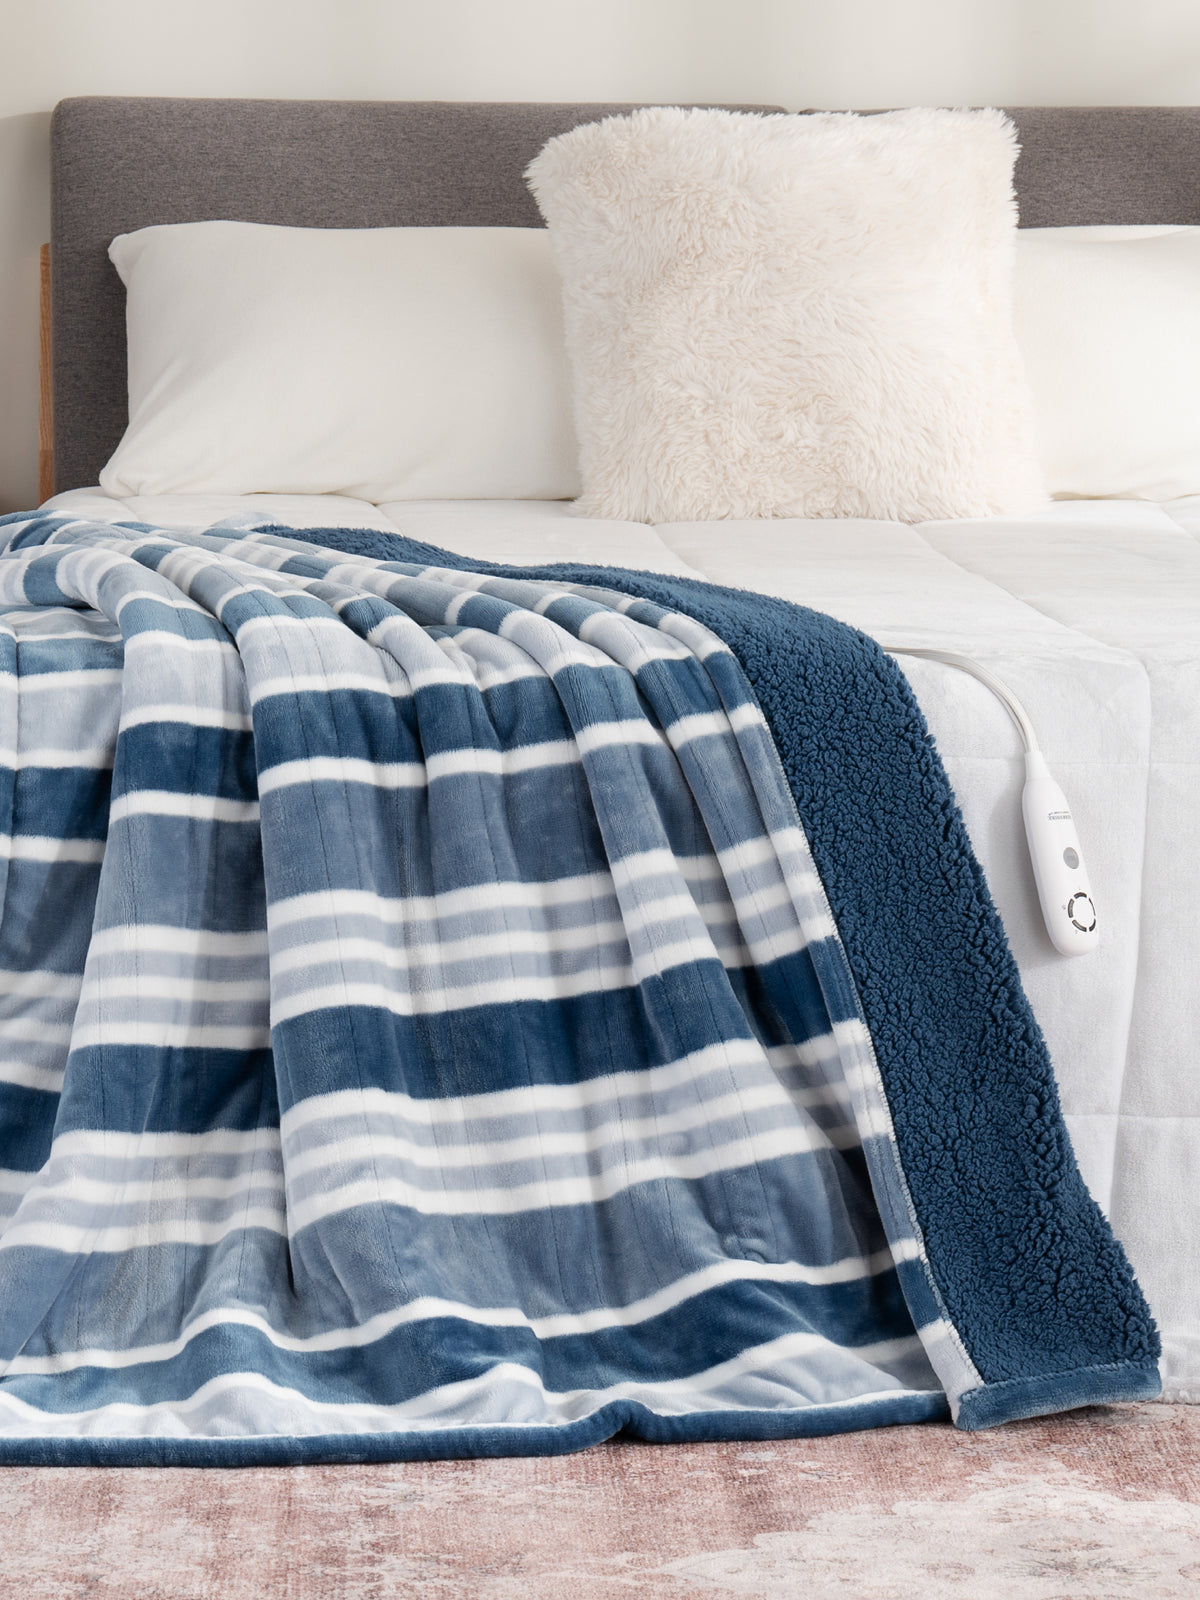 Heated collection image featuring our Varigated Stripe VelvetLoft Sherpa Throw draped over a white bed.